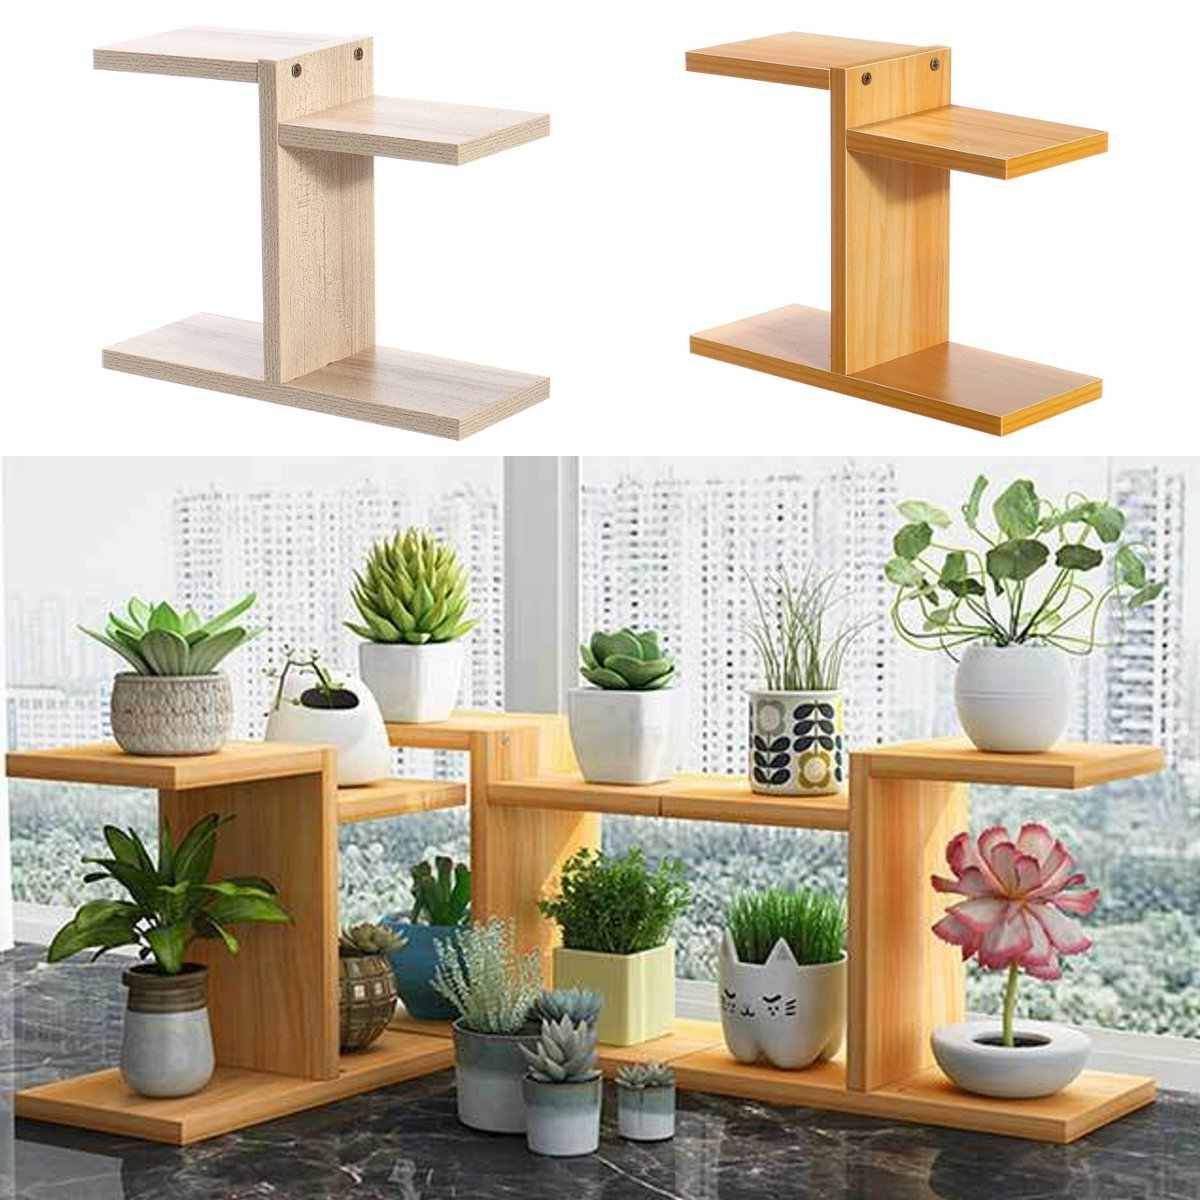 Particle Board Plant Stands With Preferred Simple Household Mdf Multi Layer Plant Stand Succulent Shelf Rack Balcony  Indoor Coffee Bar Desktop Garden Flower … (View 1 of 10)